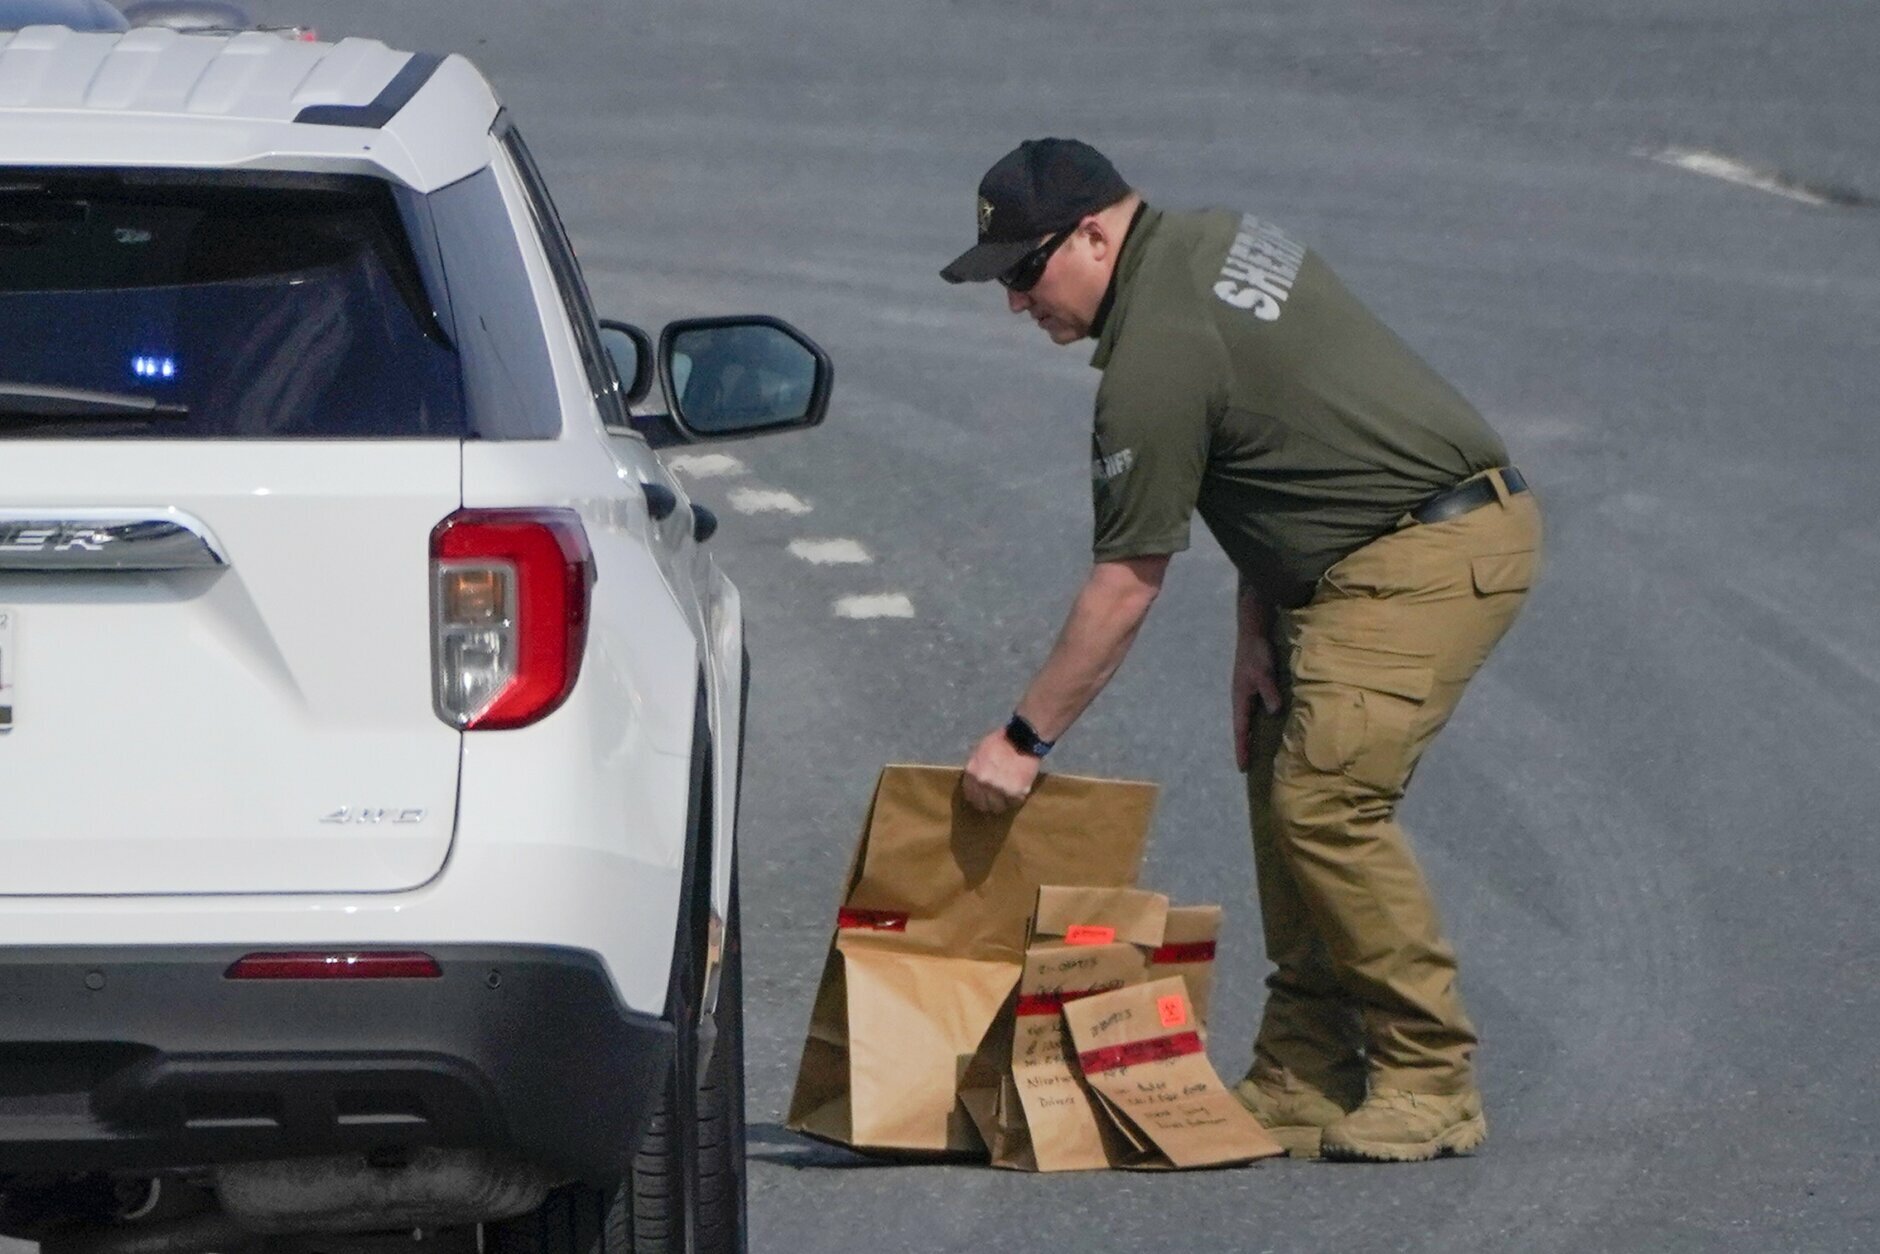 A sheriff's deputy from Frederick County, Md., puts paper bags with evidence into a police vehicle near the scene of a shooting at a business park in Frederick, Md., Tuesday, April 6, 2021. (AP Photo/Julio Cortez)